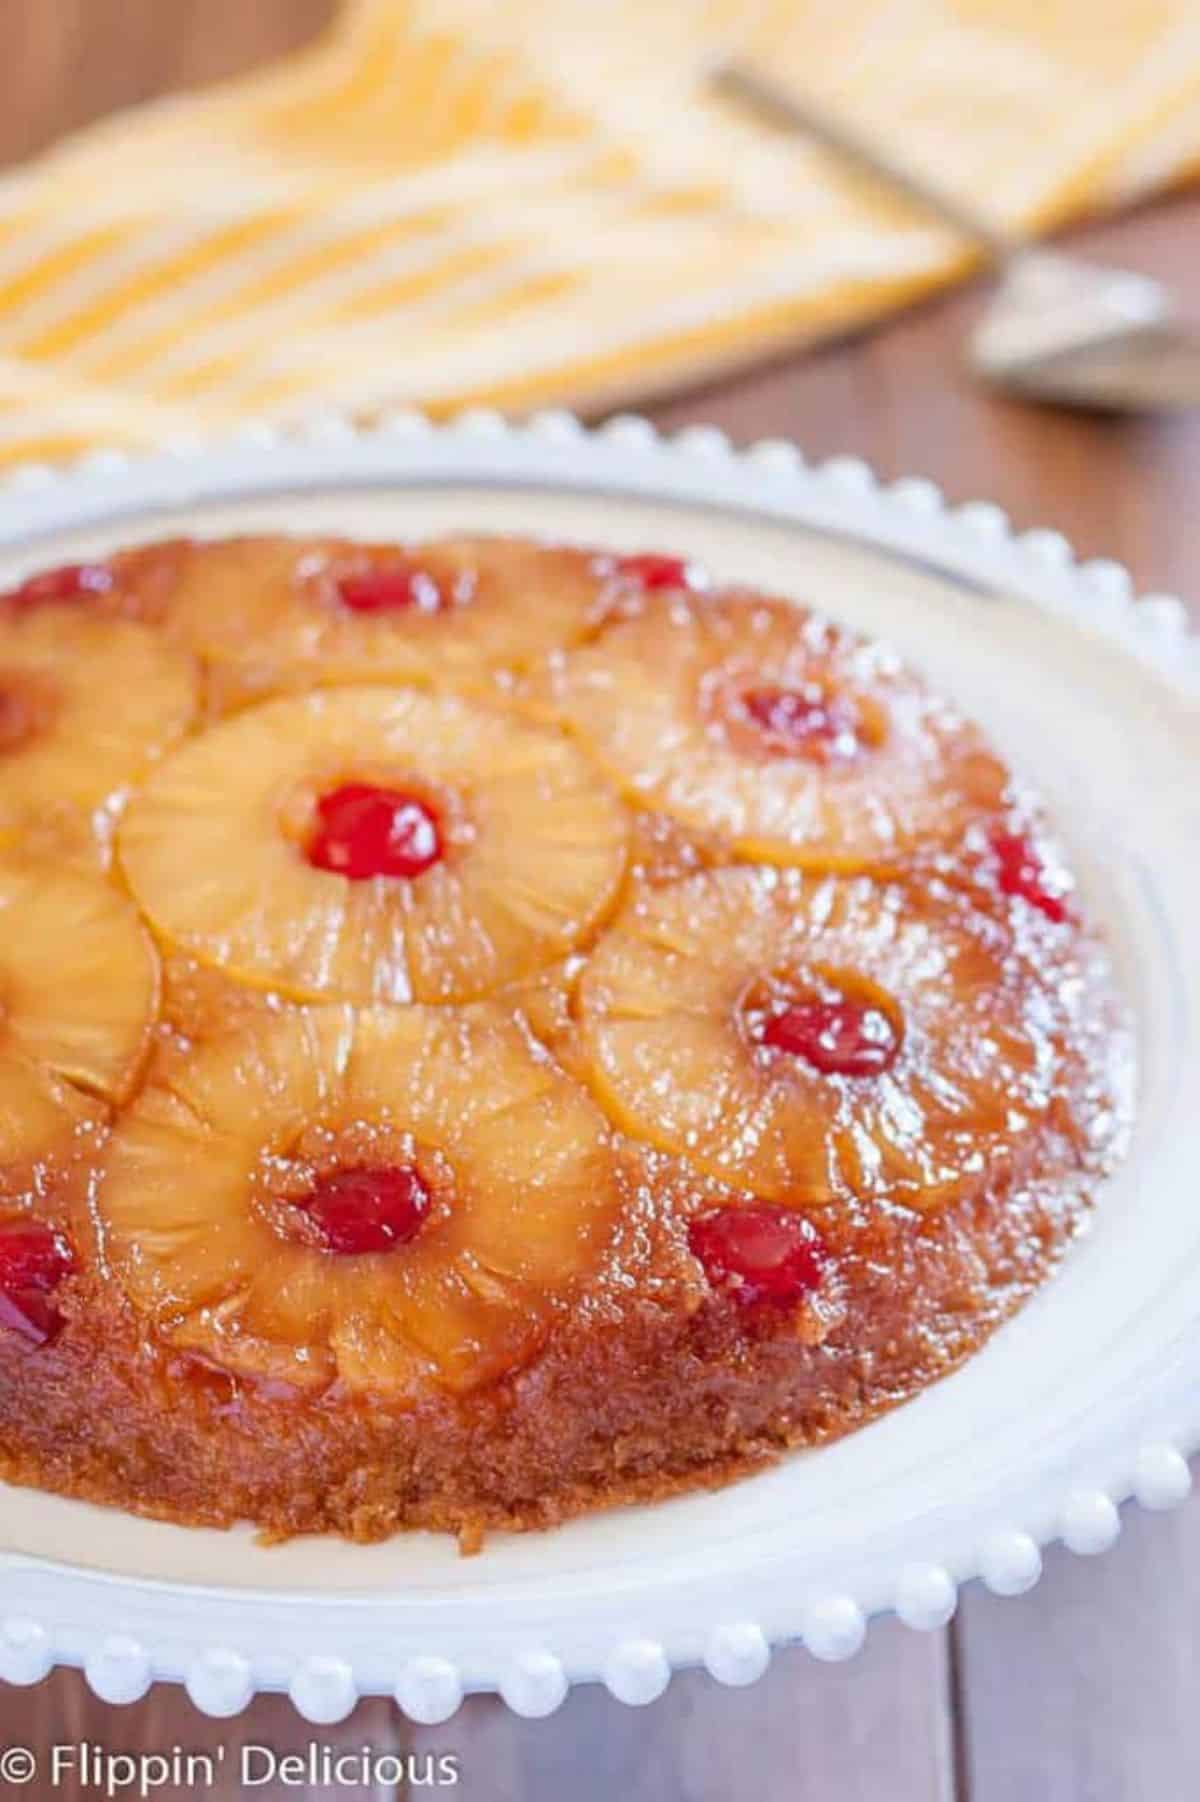 Delicious Pineapple Upside Down Cake on a cake tray.